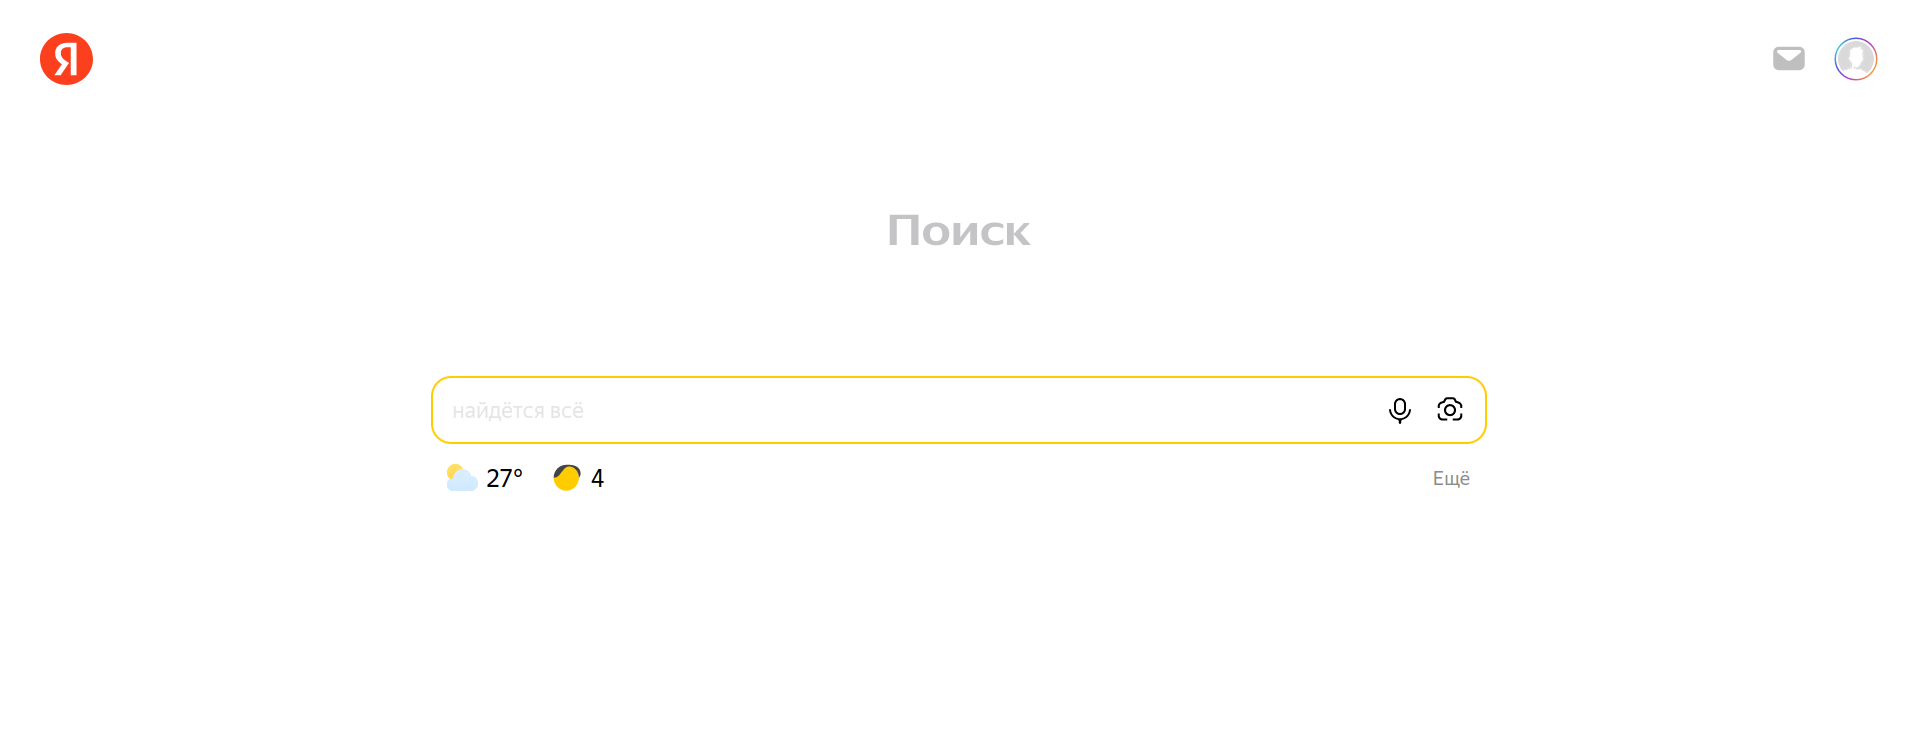 Yandex made the ya.ru website a single entry point to its services and removed the switch to the old page design